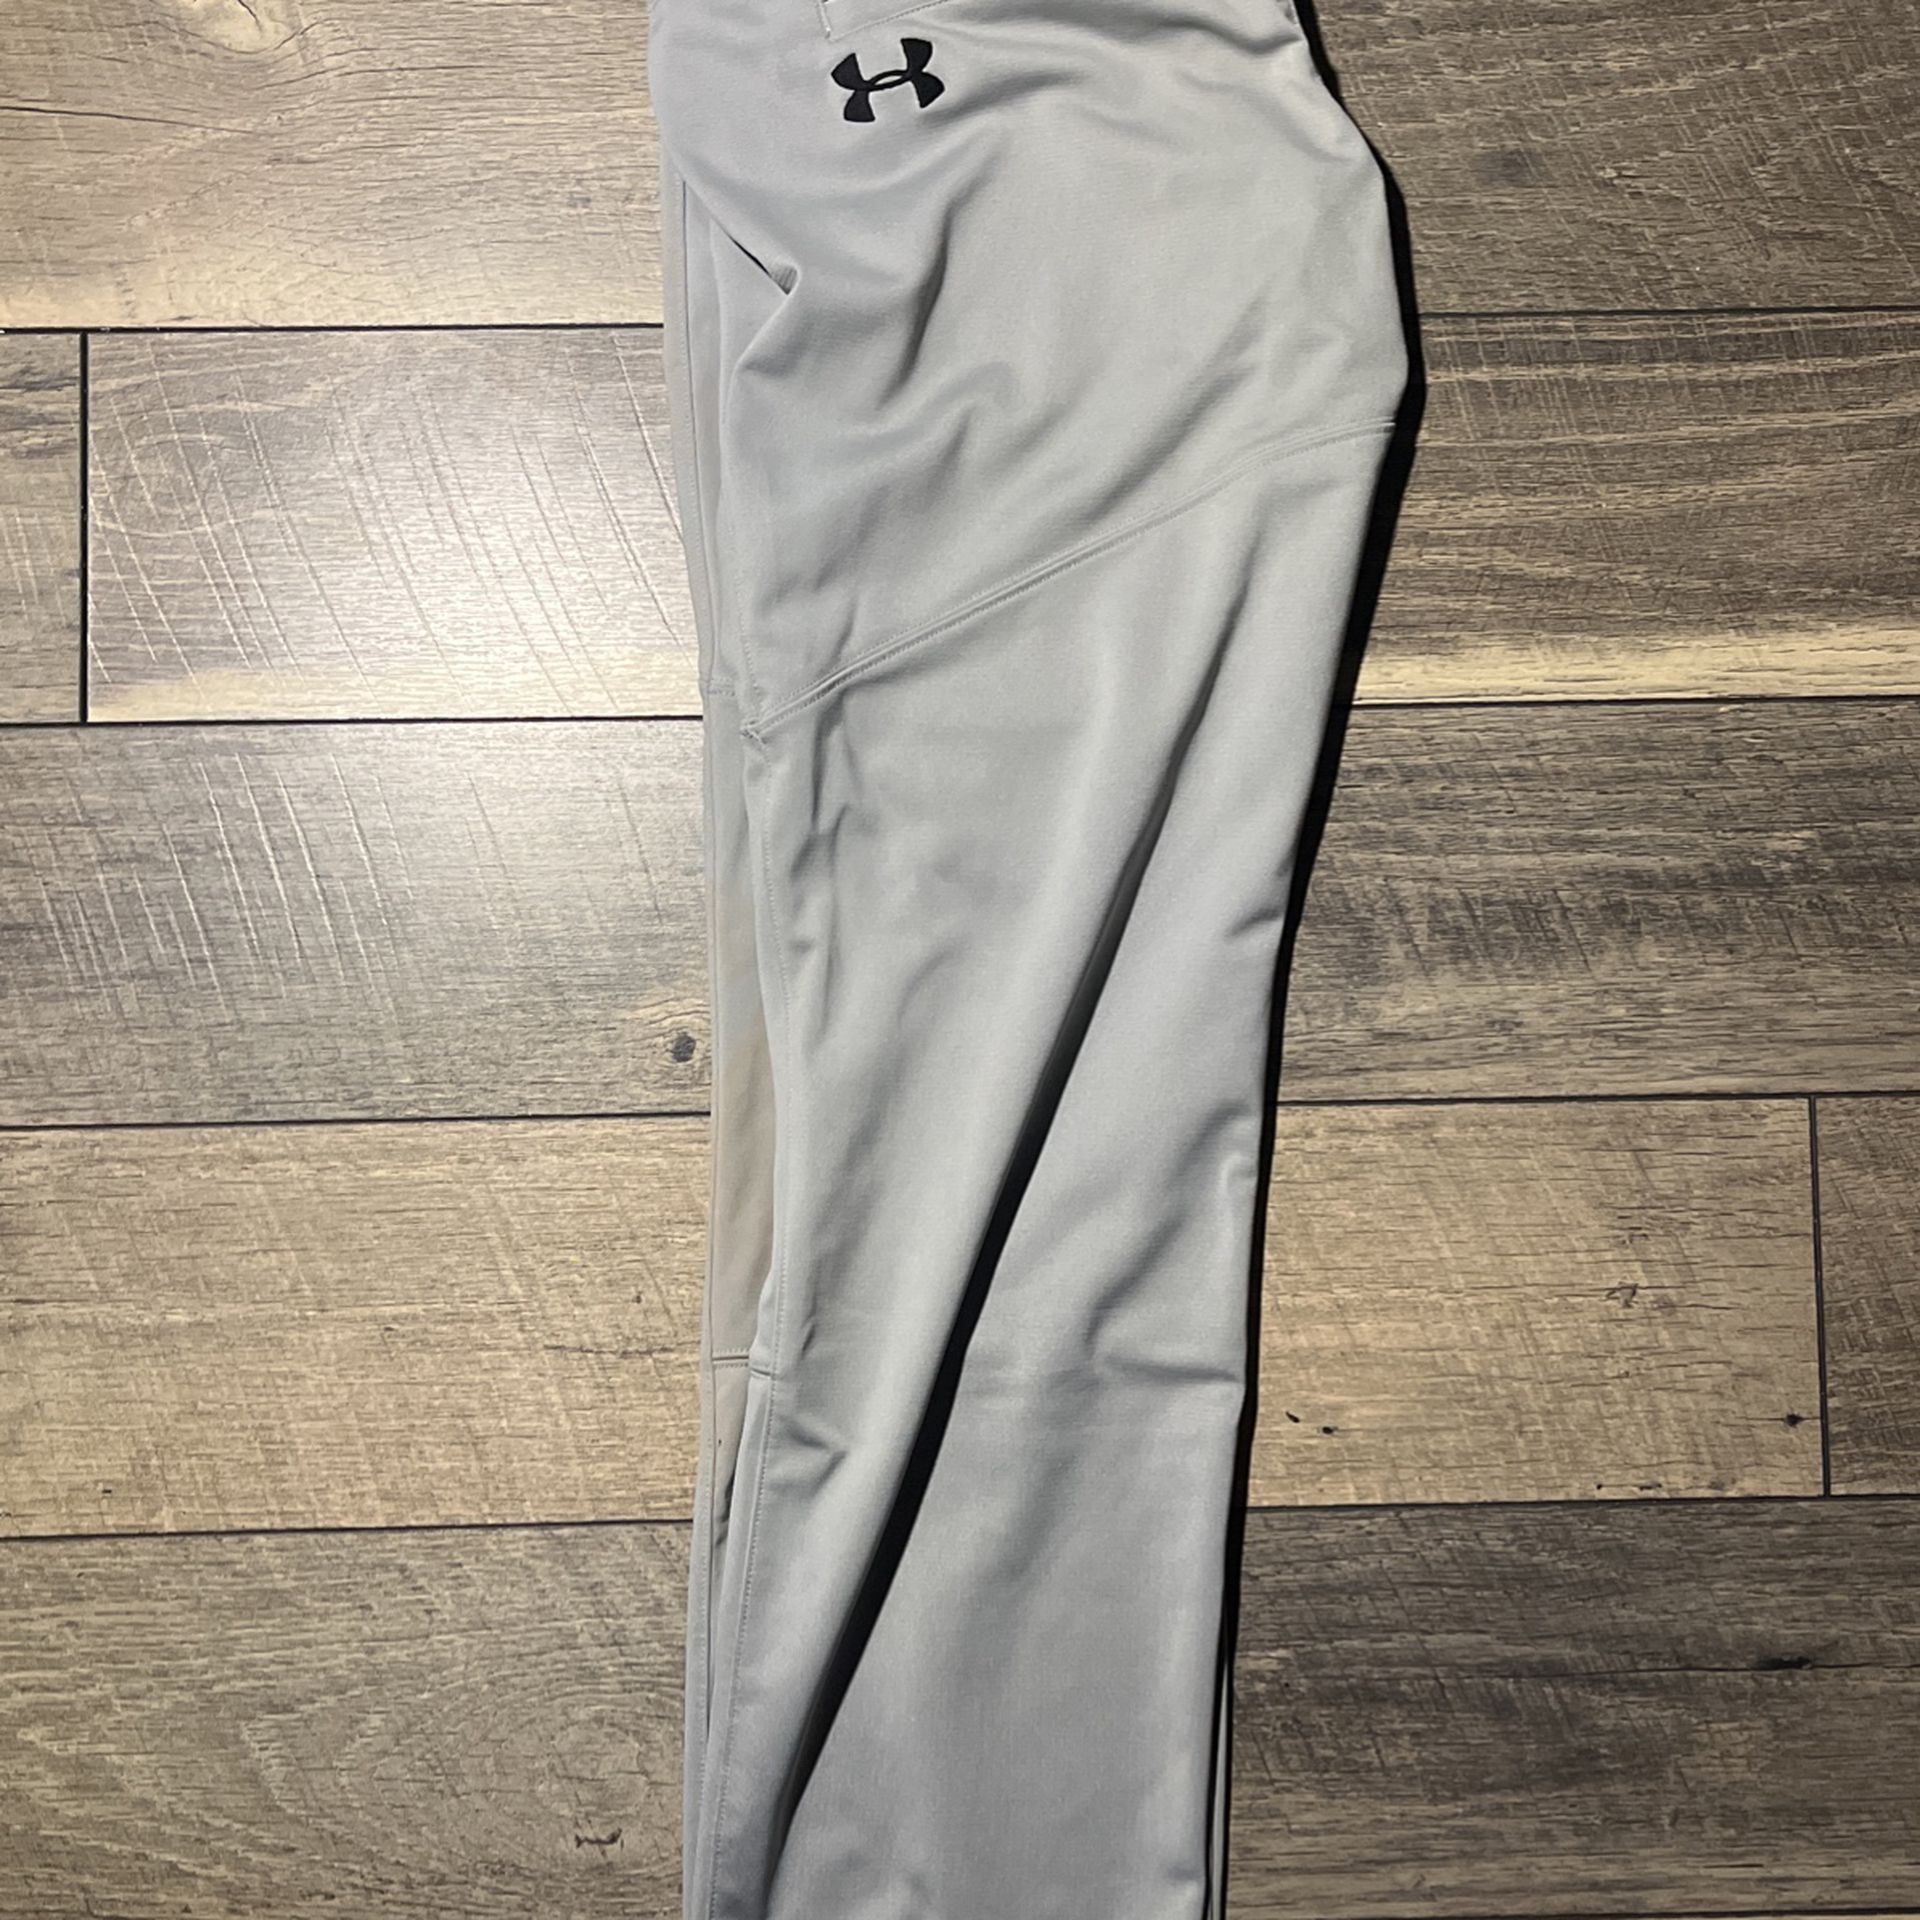 Under armour Grey Baseball Pants Size Small 